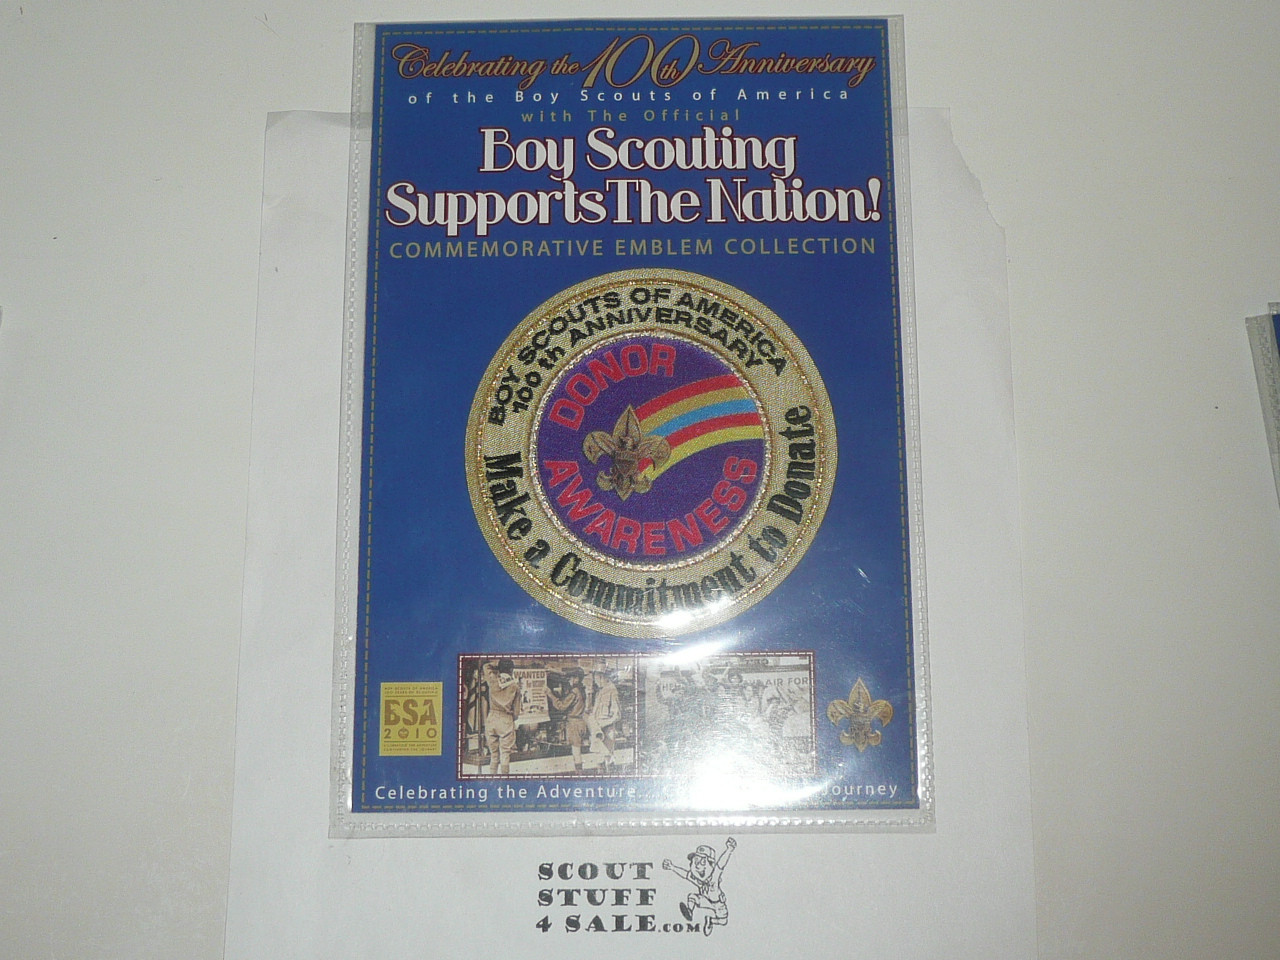 2010 100th Boy Scout Anniversary Commemorative Patch, Boy Scouting Supports the Nation Series, Donor Awareness